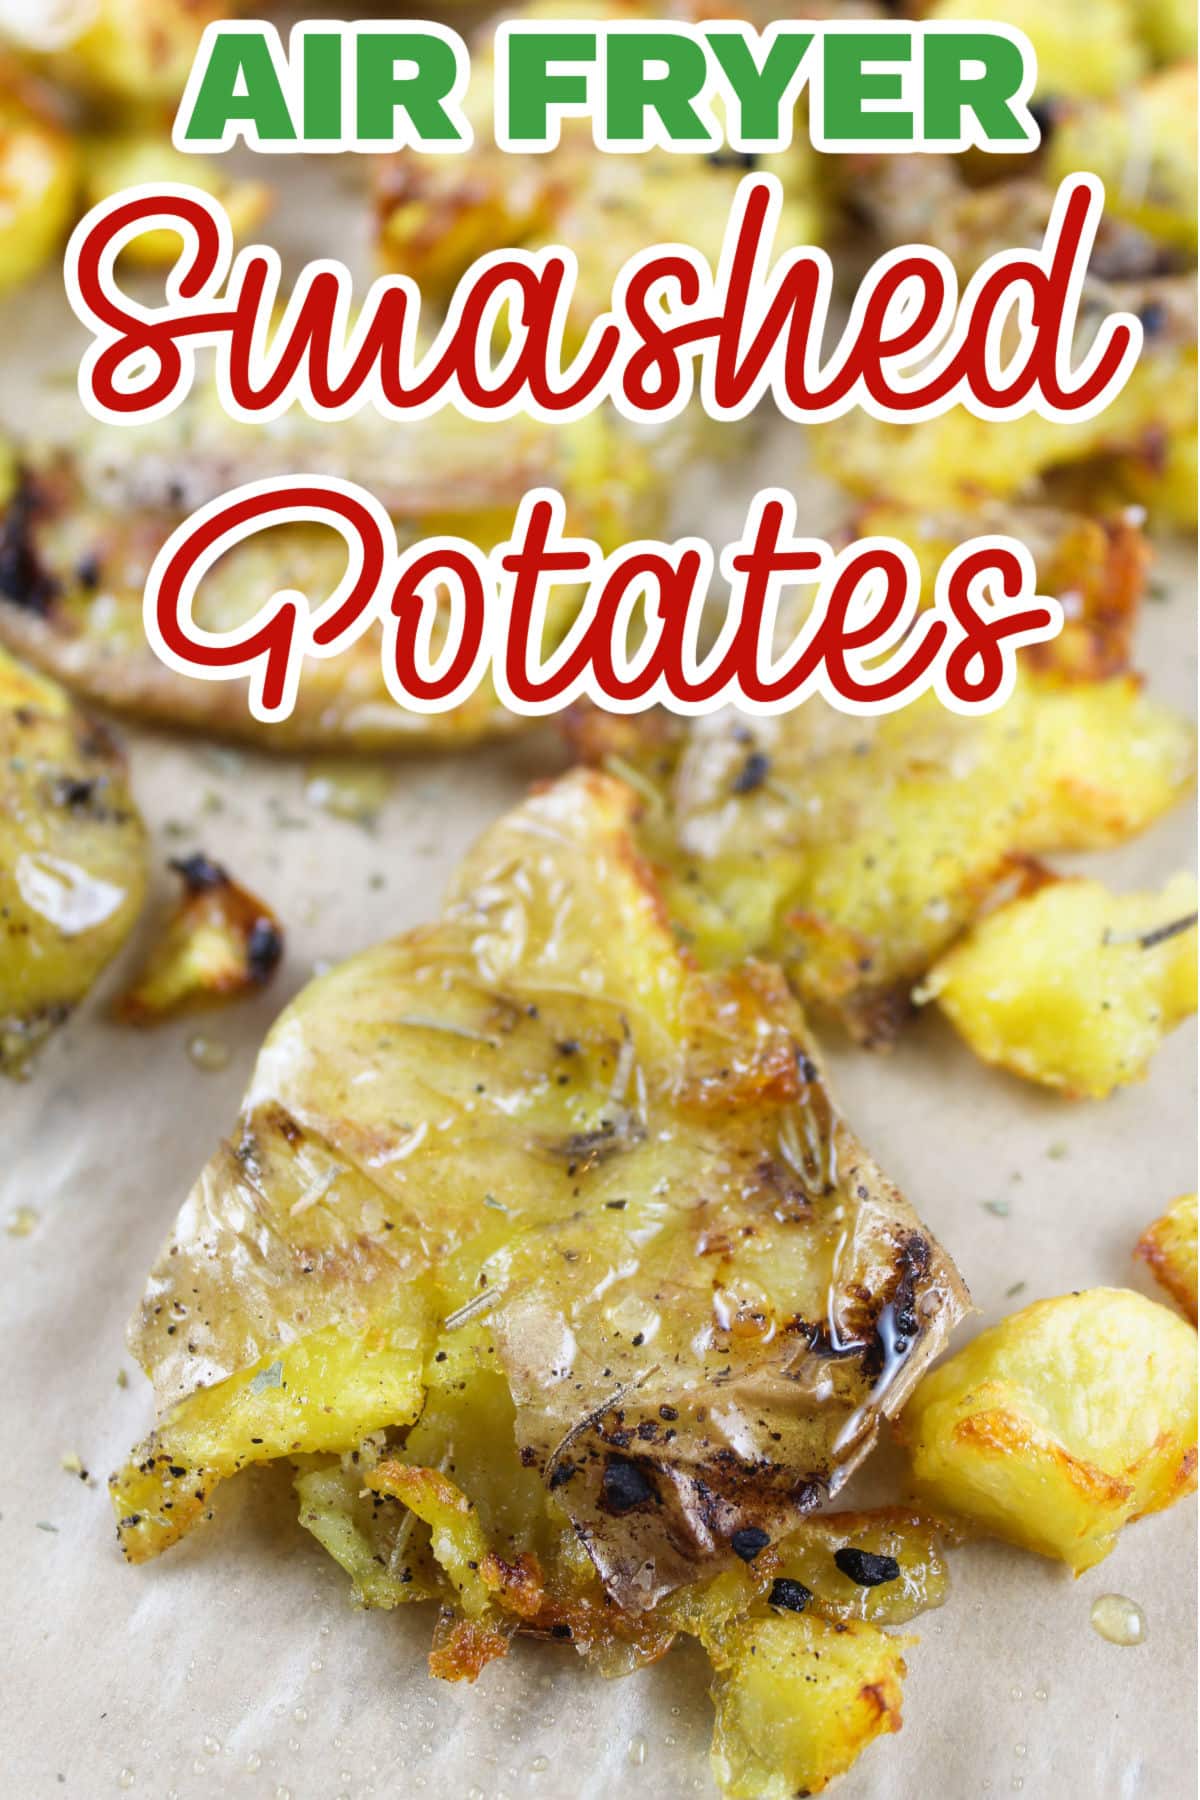 These Crispy Air Fryer Smashed Potatoes are crispy on the outside and fluffy inside! Lightly seasoned with olive oil, salt, pepper, garlic and crushed rosemary - you'll love every bite! These are made a little quicker with a quick cooking hack!  via @foodhussy